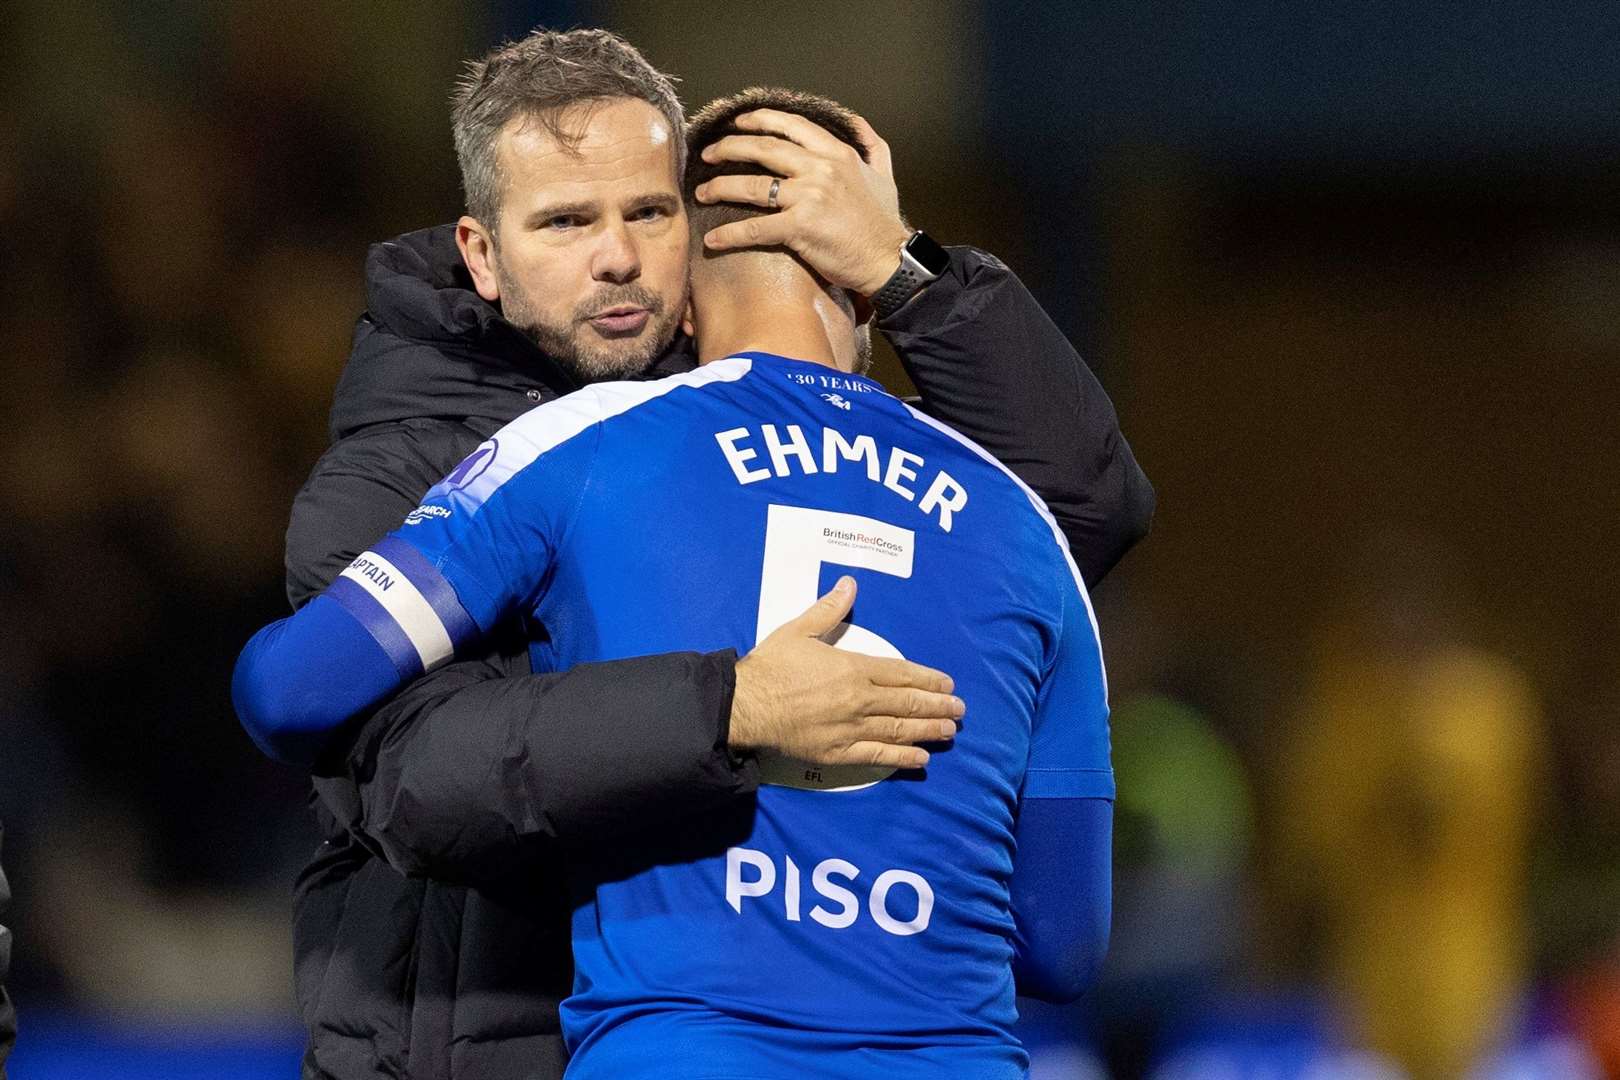 Head coach Stephen Clemence congratulates Max Ehmer after a 1-0 win for Gillingham over Sutton Picture: @Julian_KPI